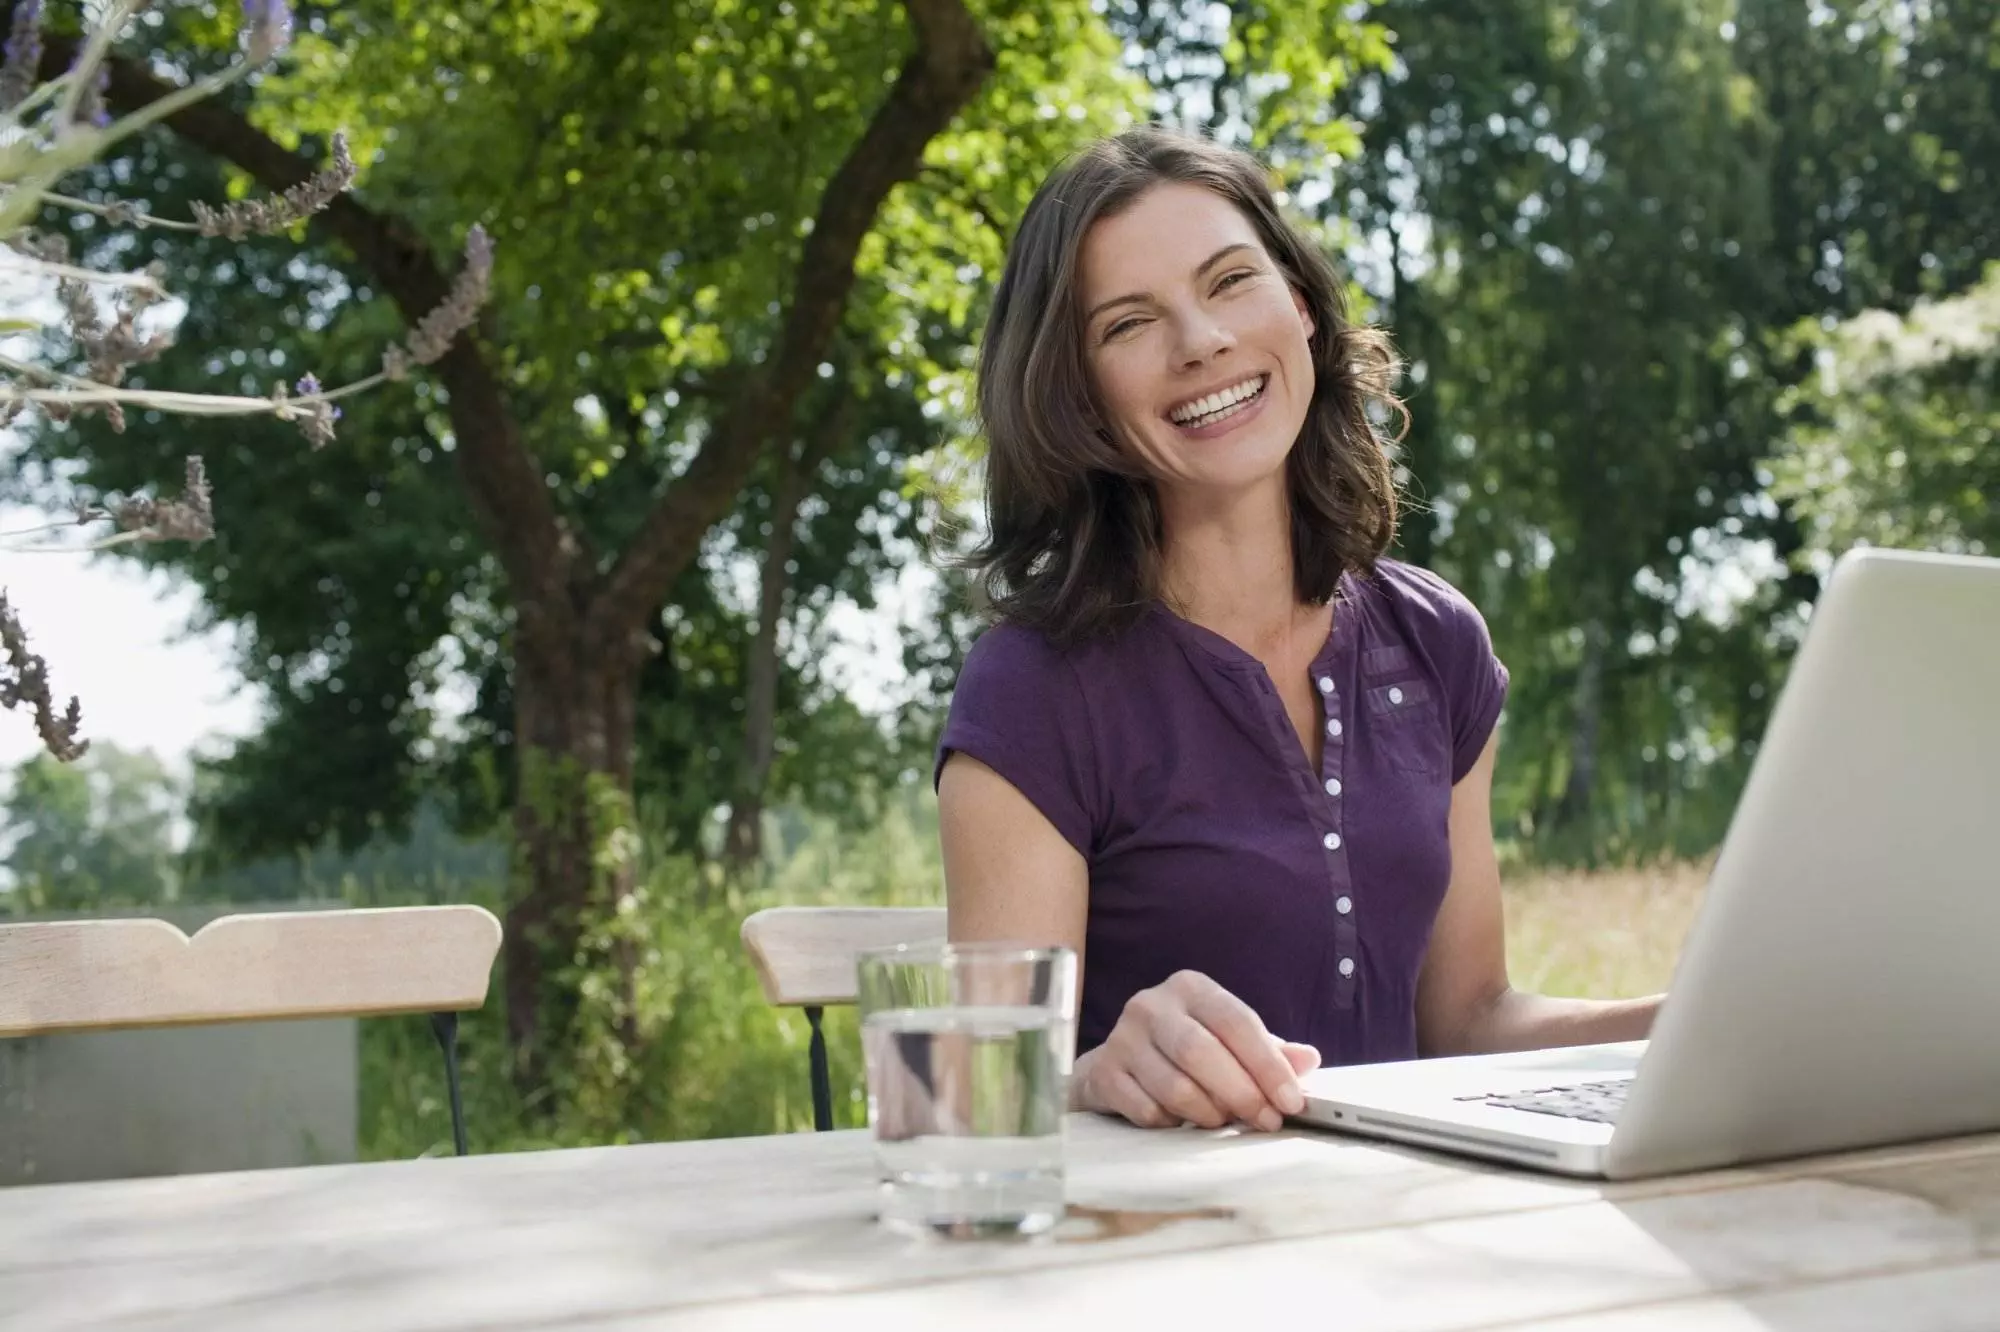 Woman working on laptop outdoors smiling.